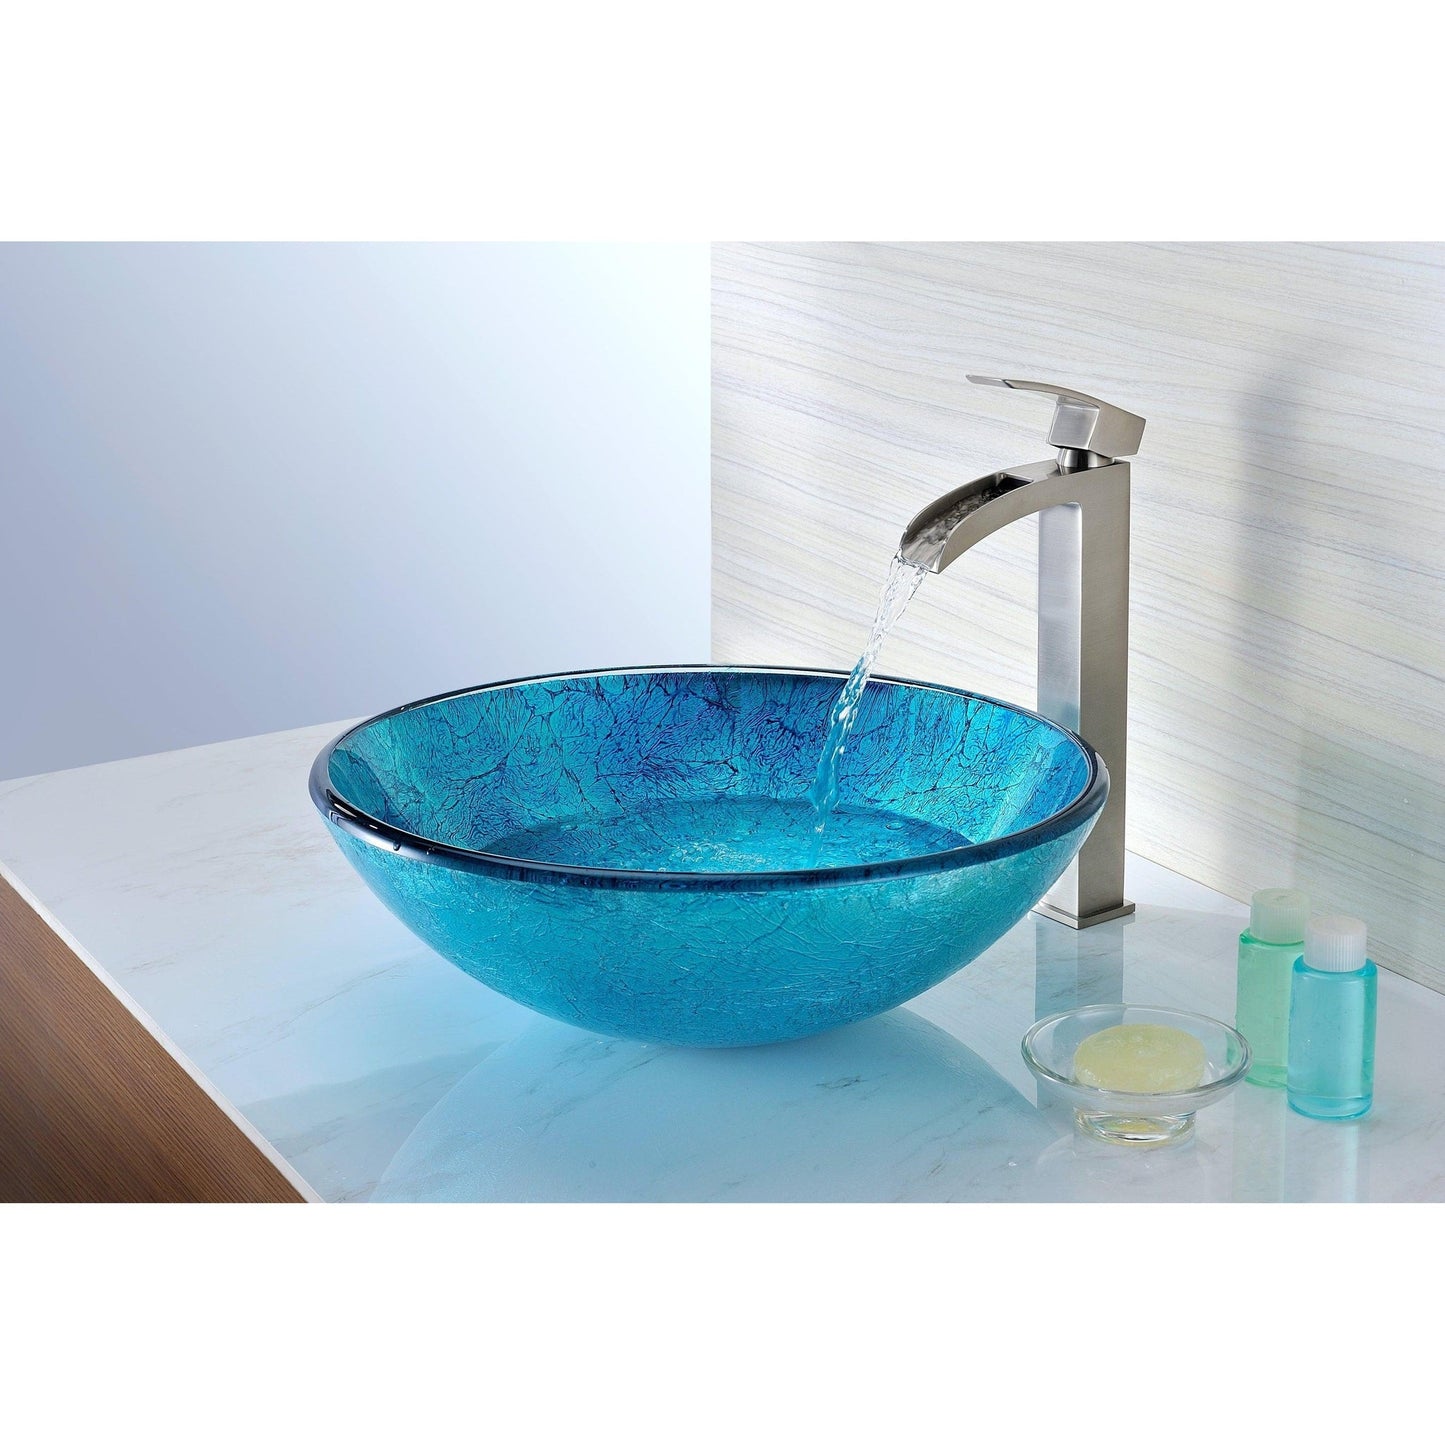 ANZZI Tereali Series 17" x 17" Round Blue Ice Deco-Glass Vessel Sink With Polished Chrome Pop-Up Drain